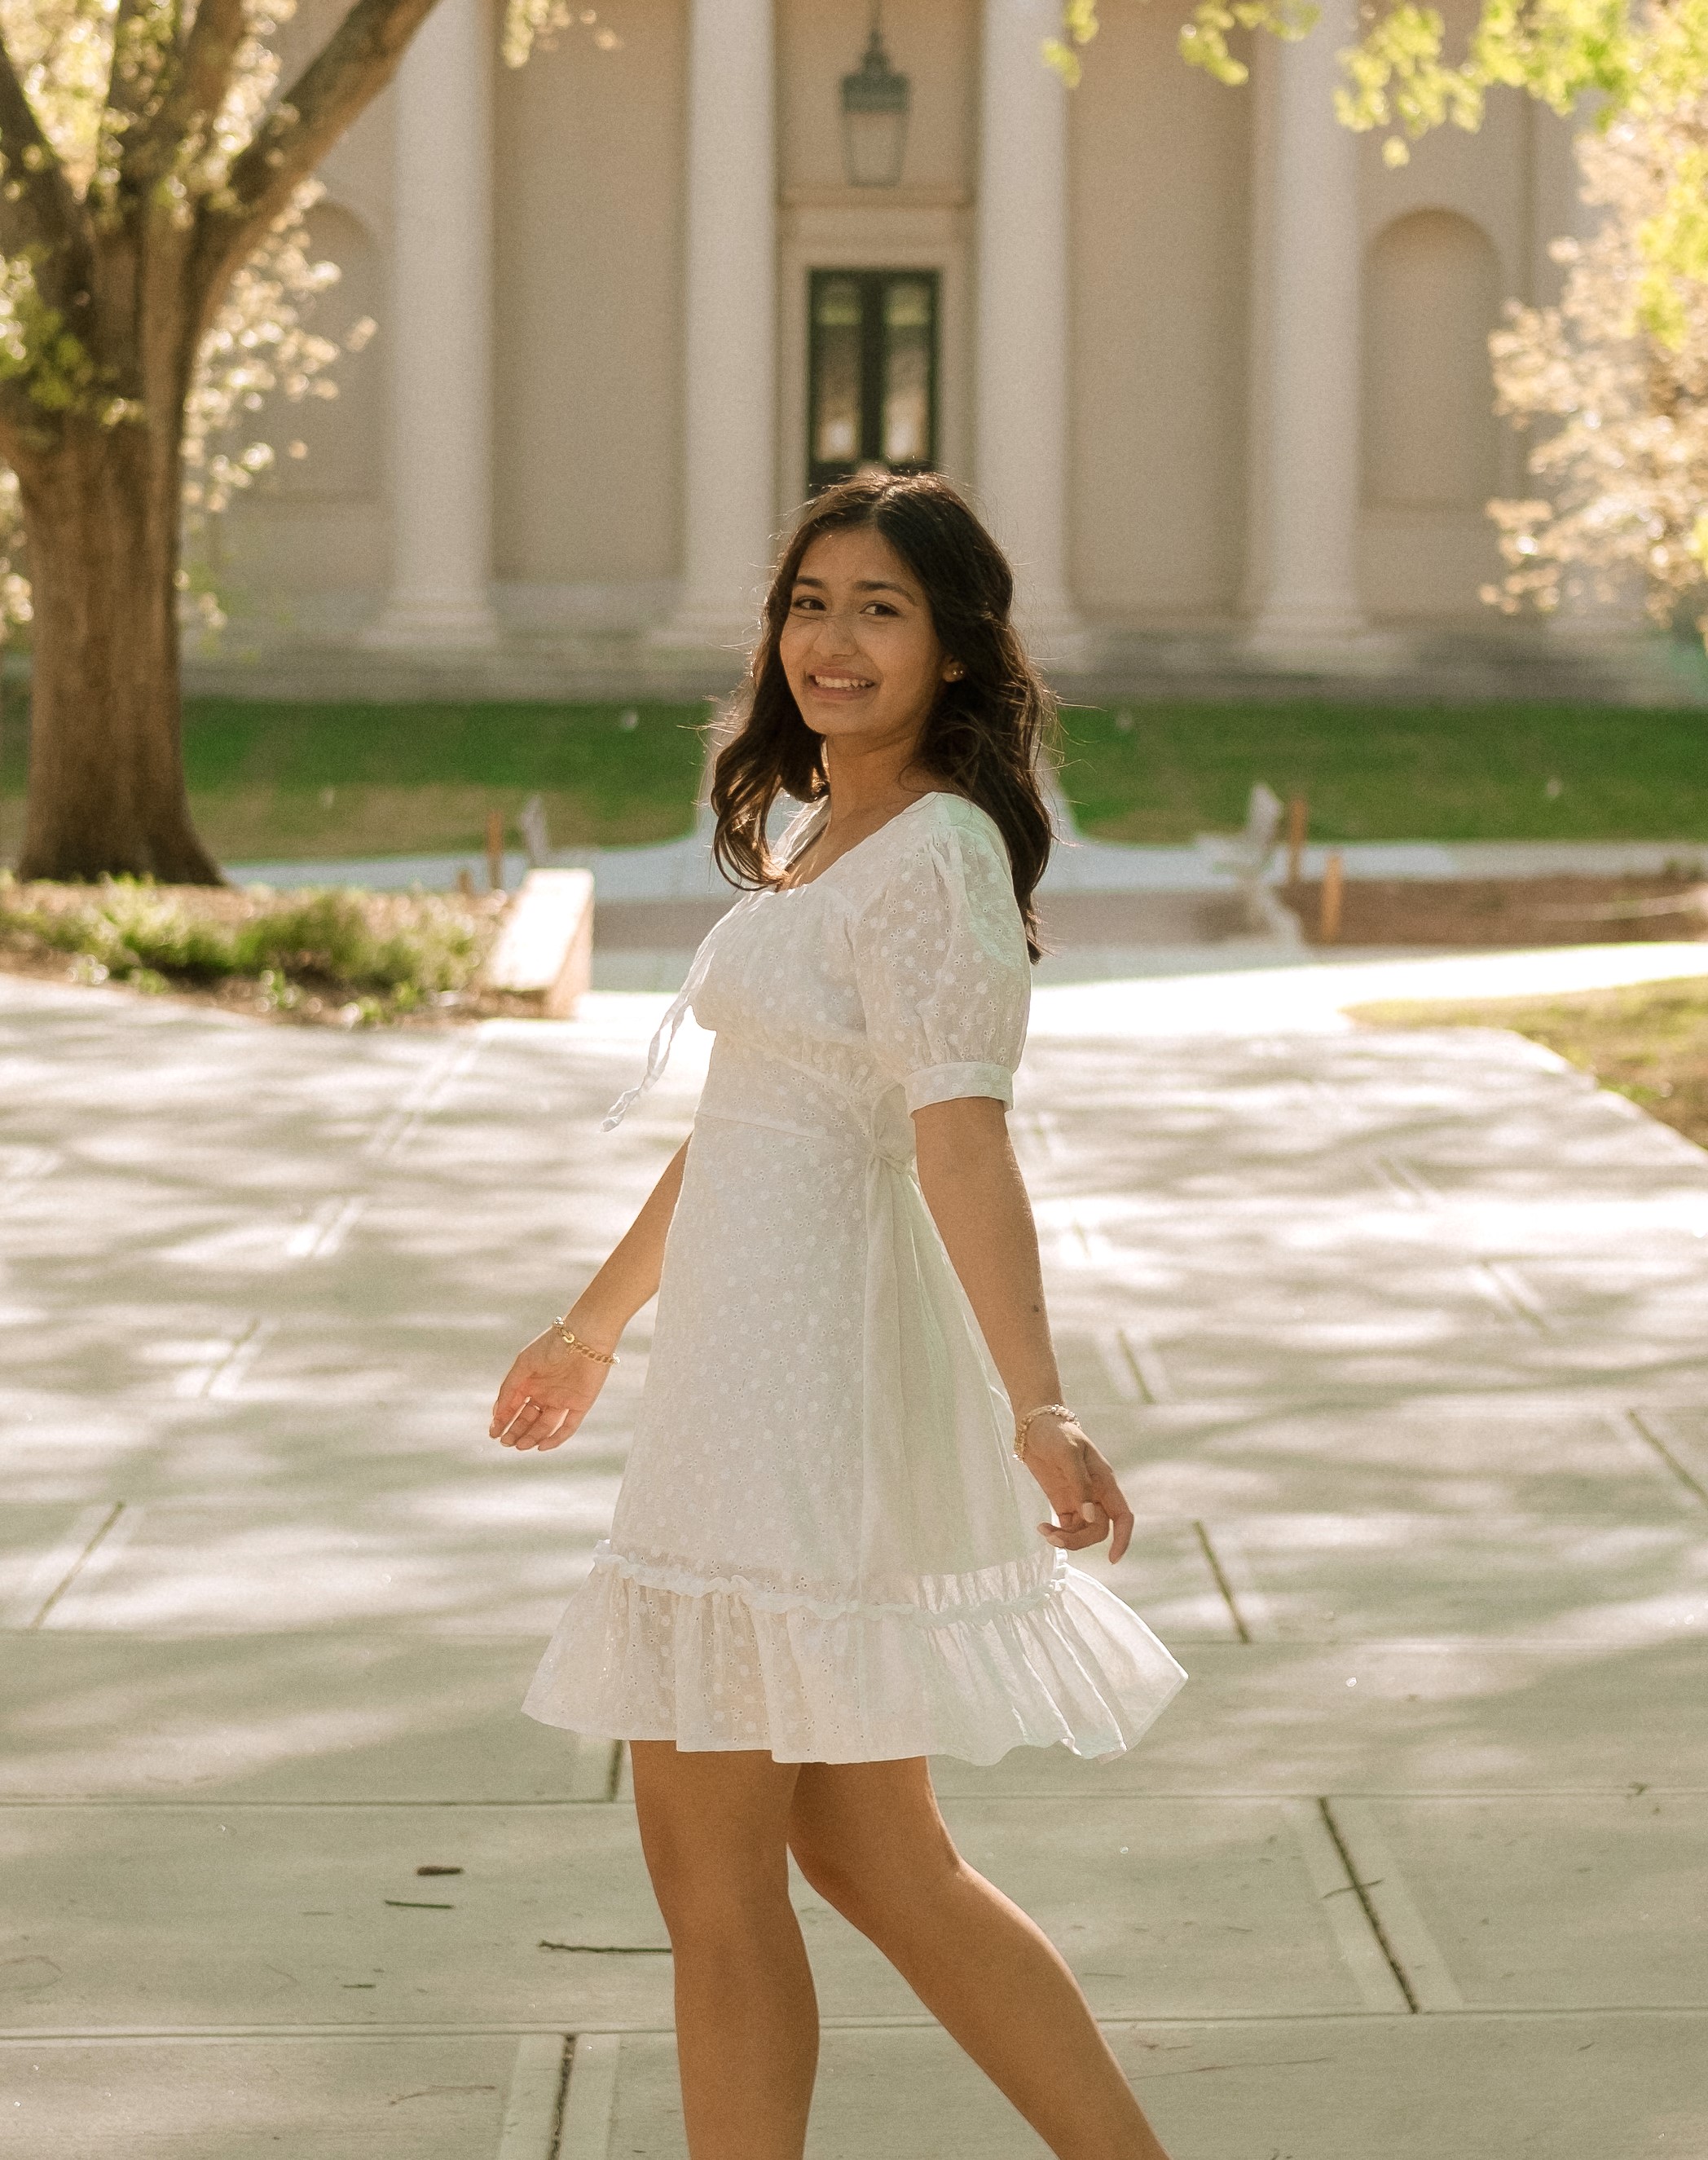 Picture of Himani in a white dress on UGA's campus